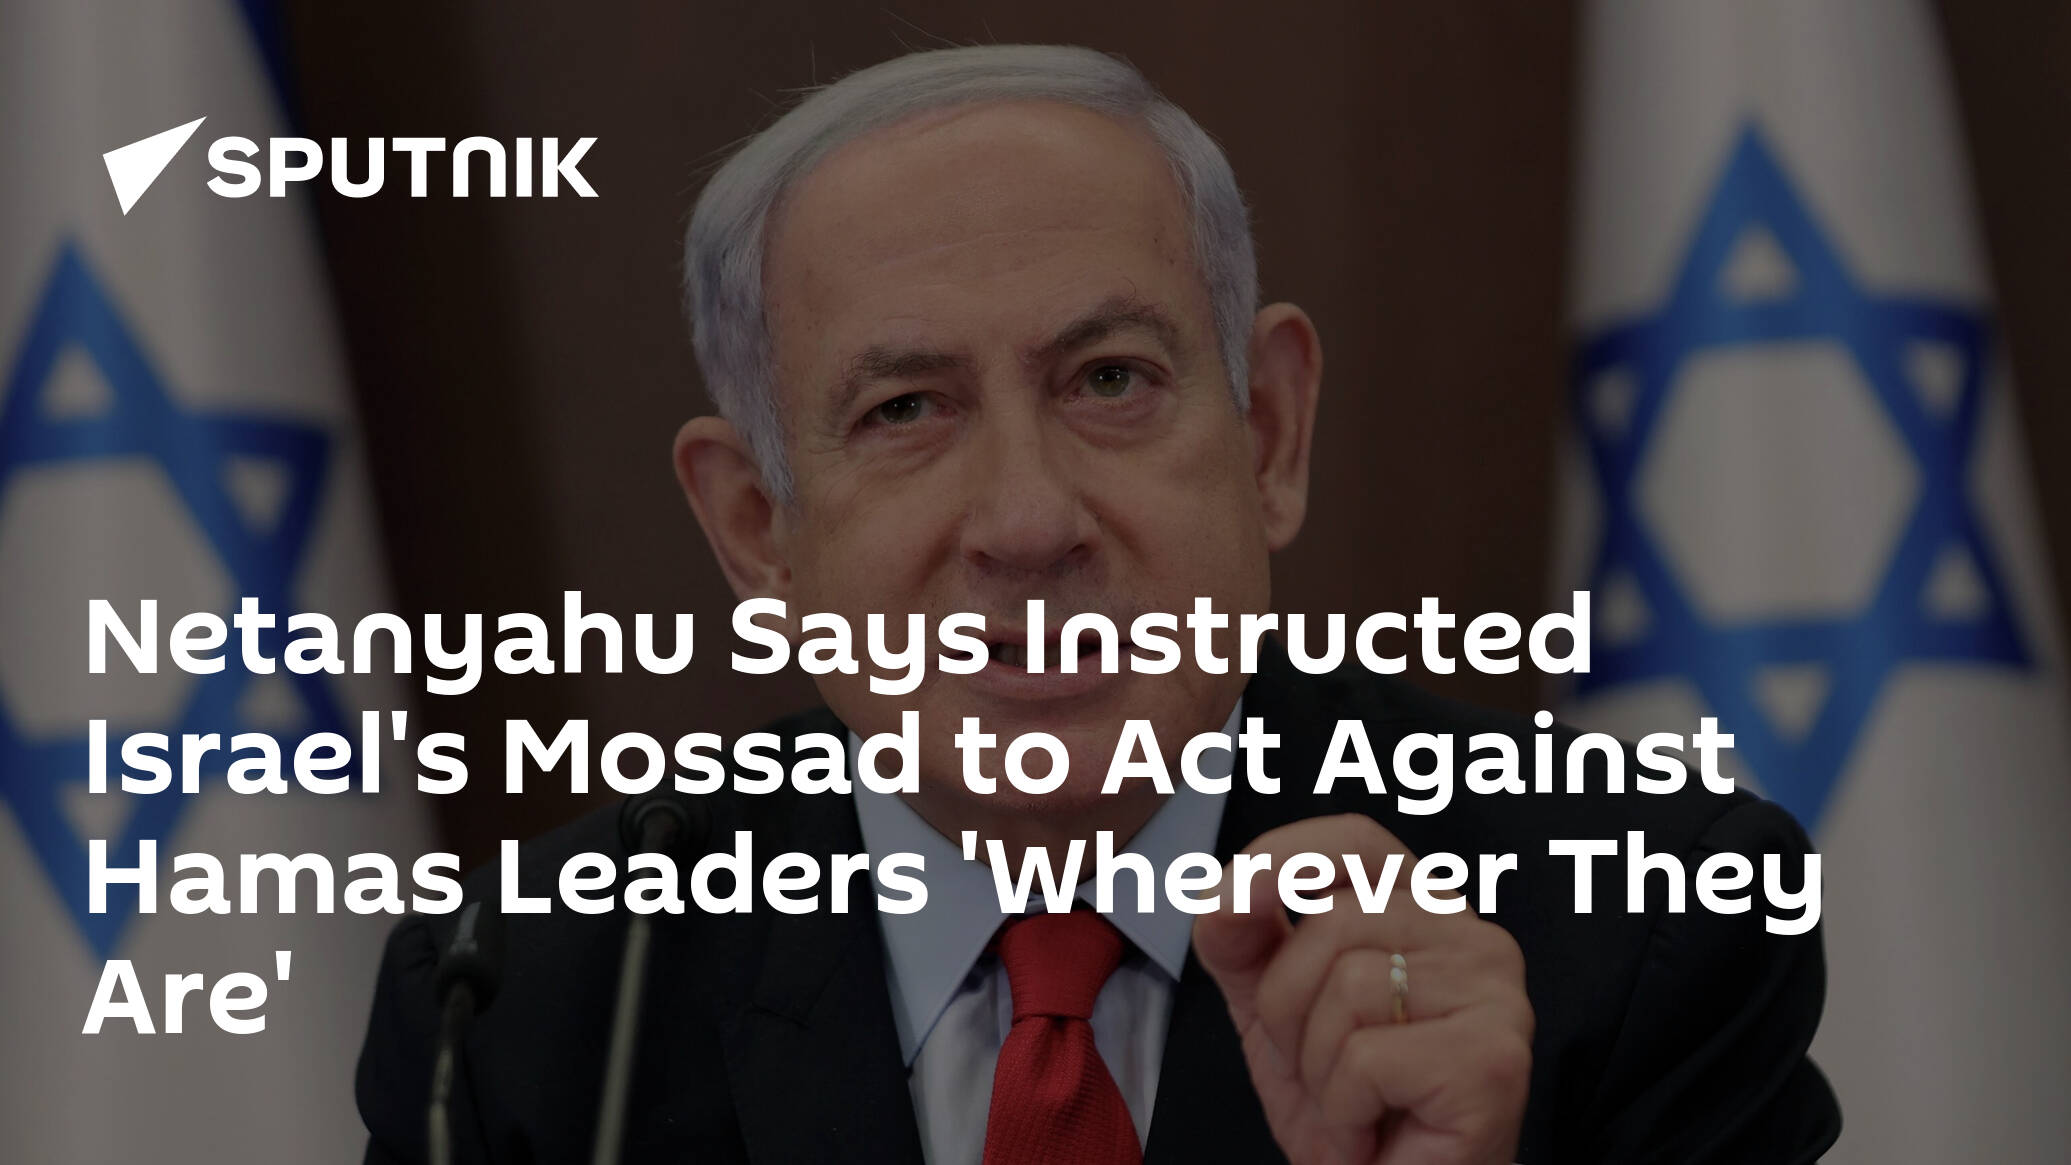 Netanyahu Says Instructed Israel's Mossad to Act Against Hamas Leaders 'Wherever They Are'